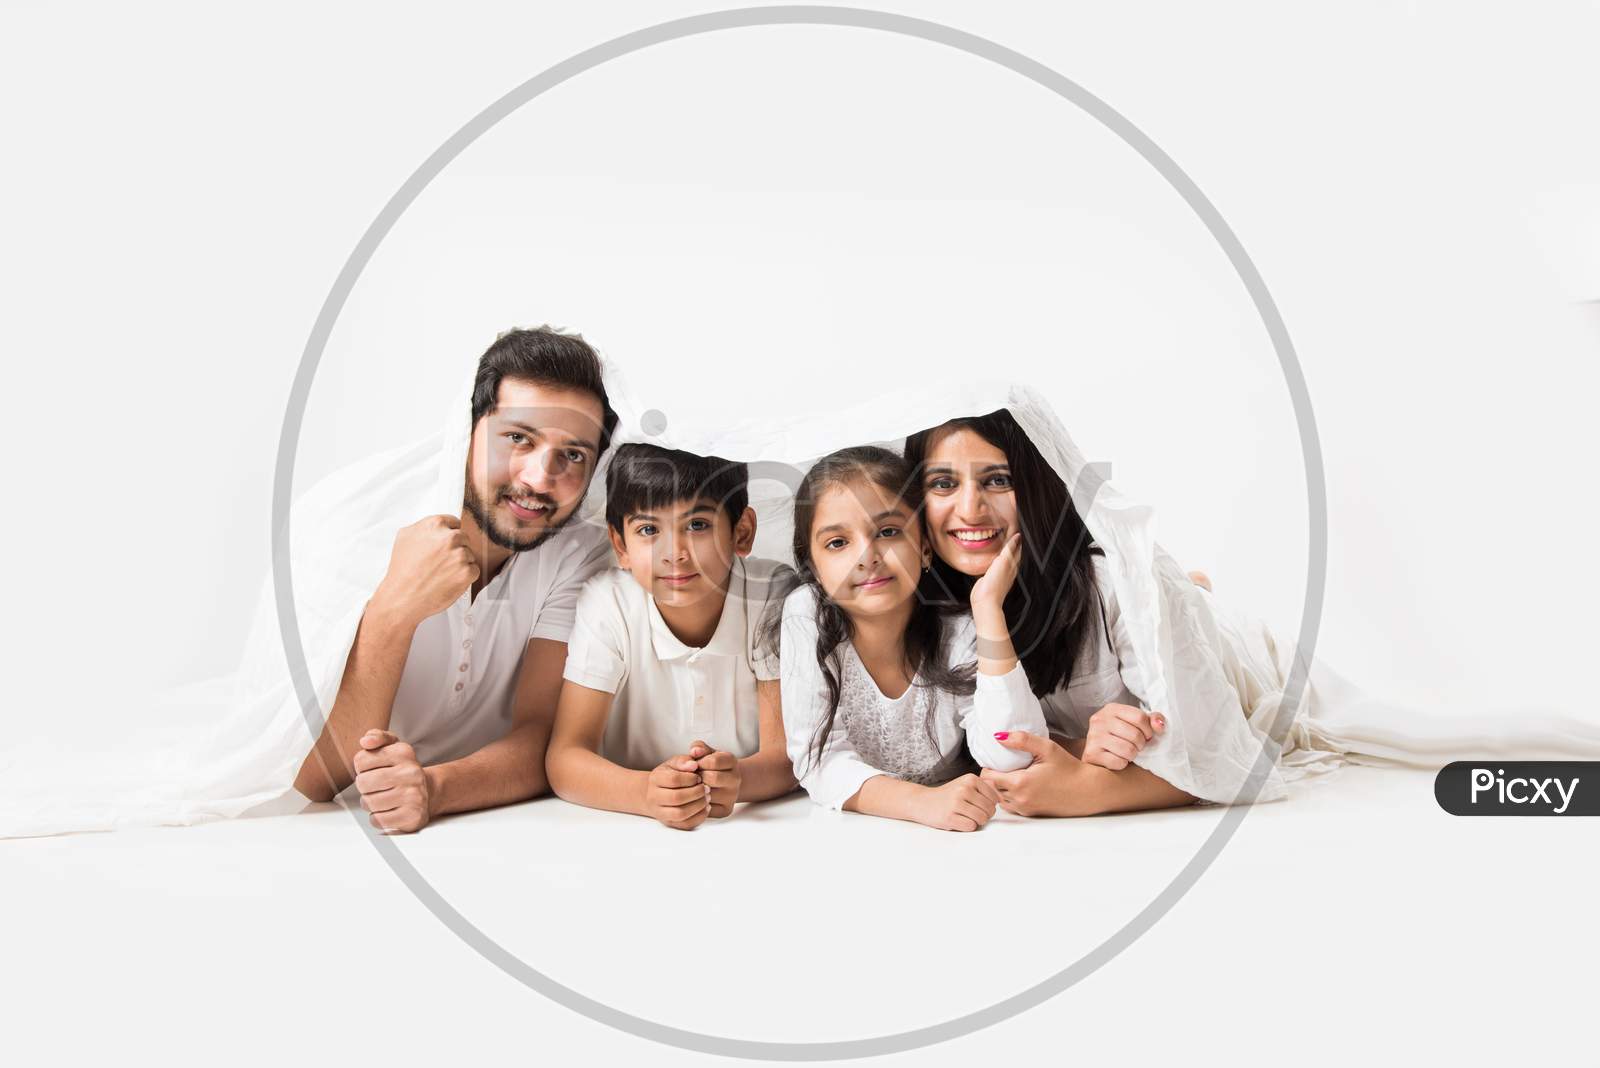 Young family of 4 standing over white